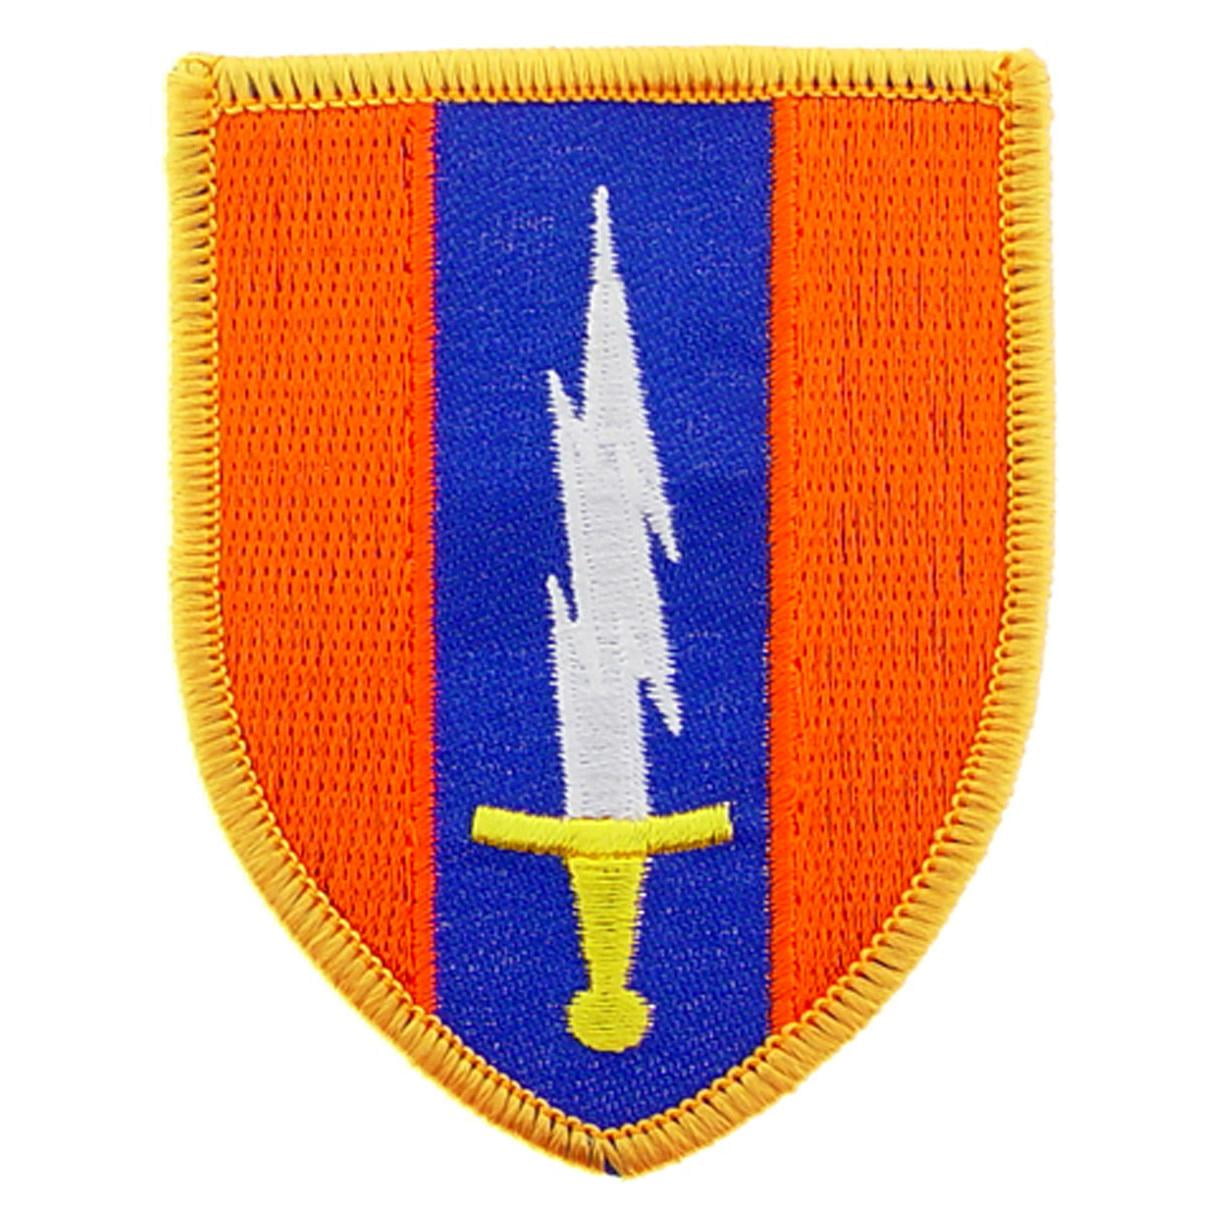 A Patch Army - Army Military